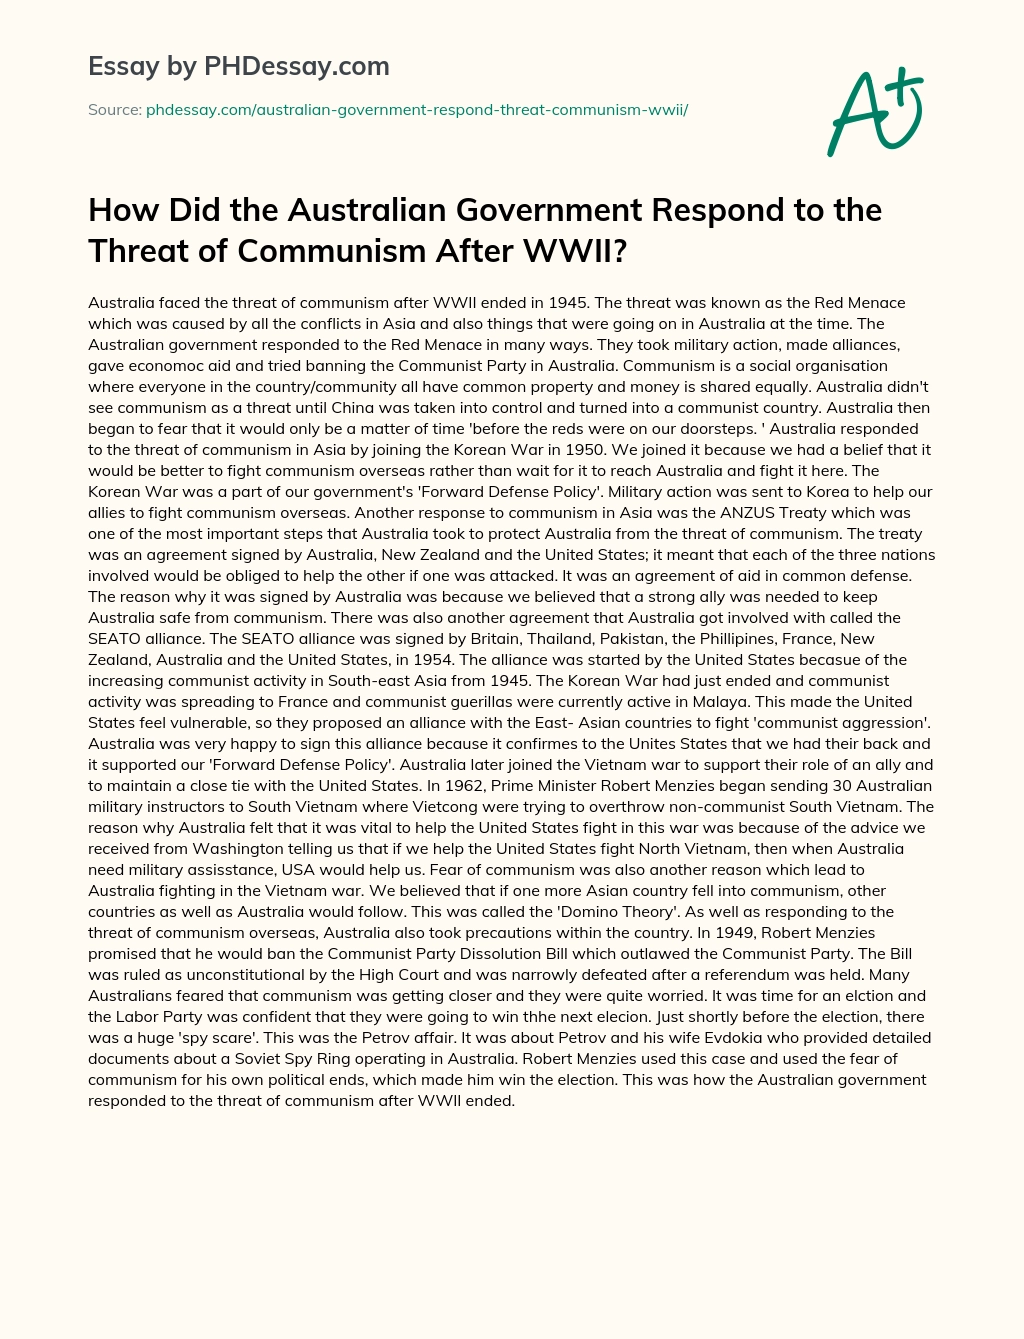 How Did the Australian Government Respond to the Threat of Communism After WWII? essay